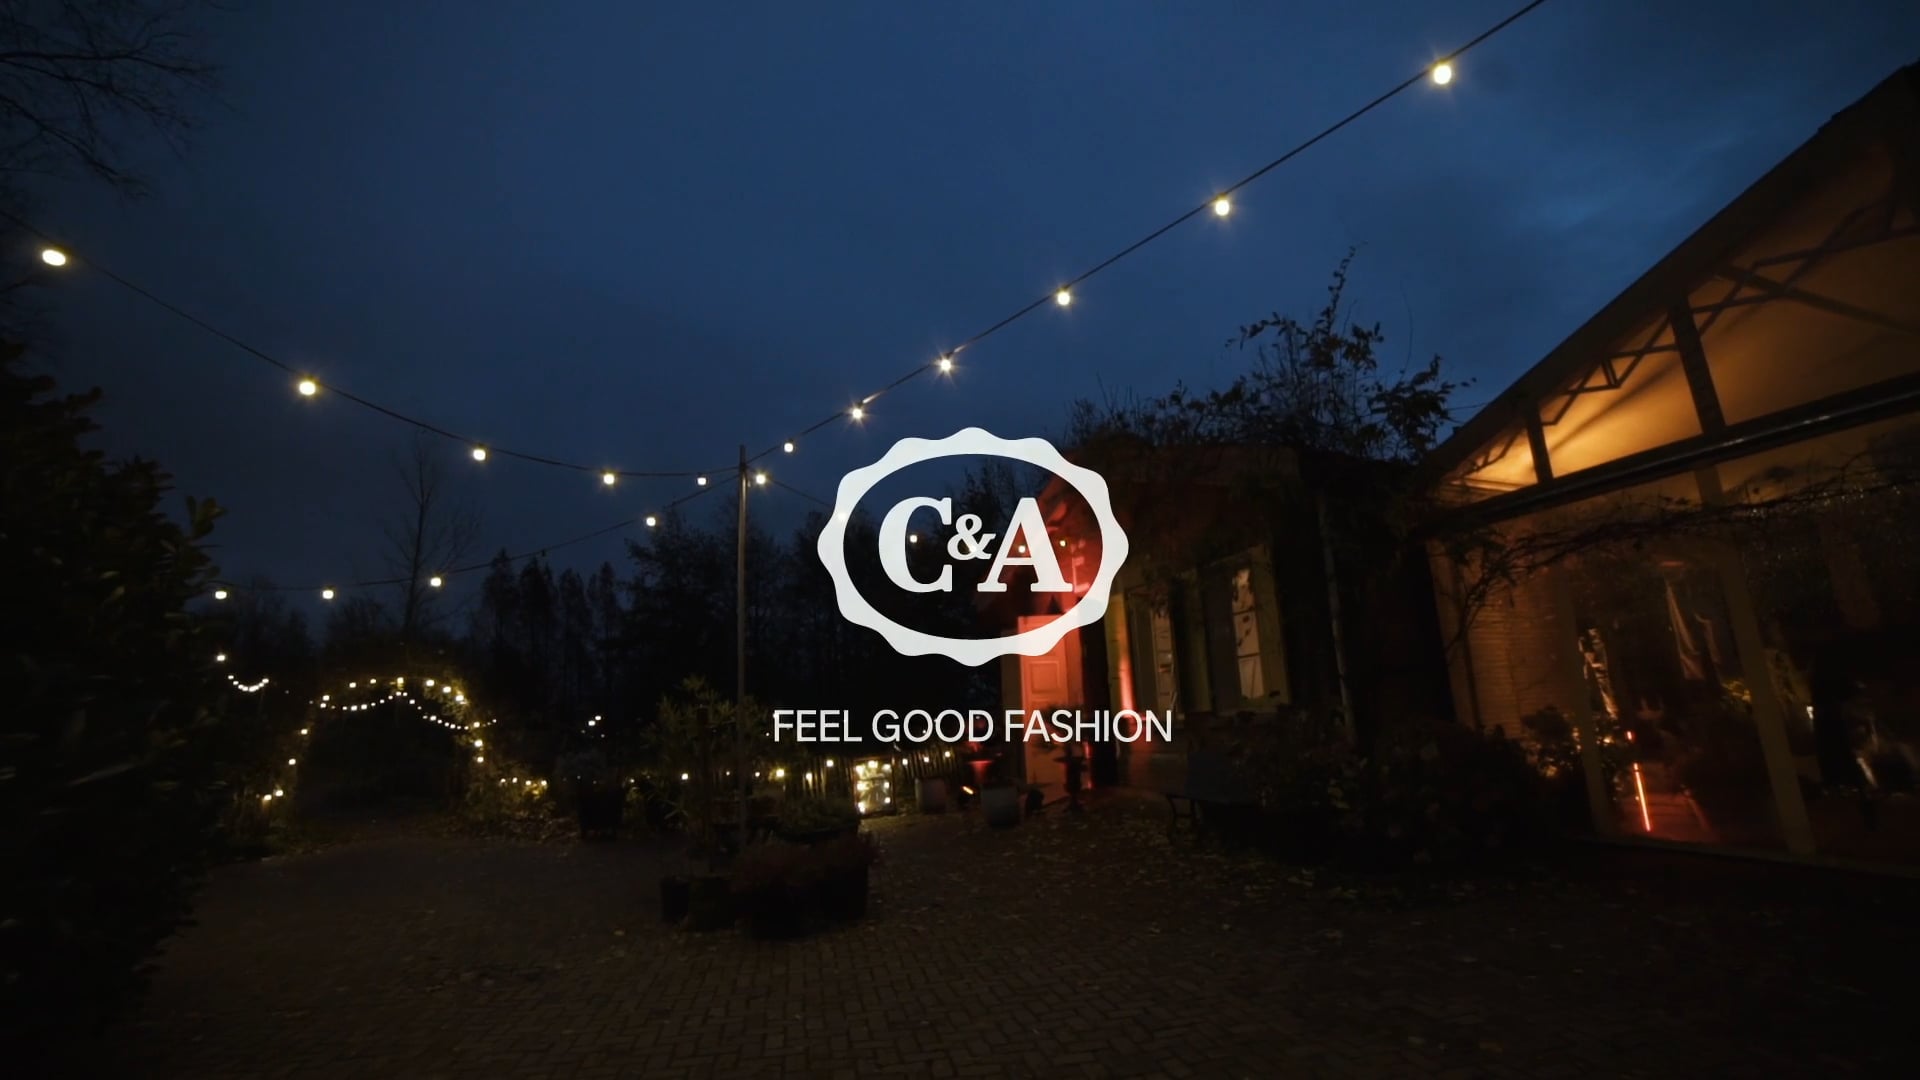 C&A experience moodvideo